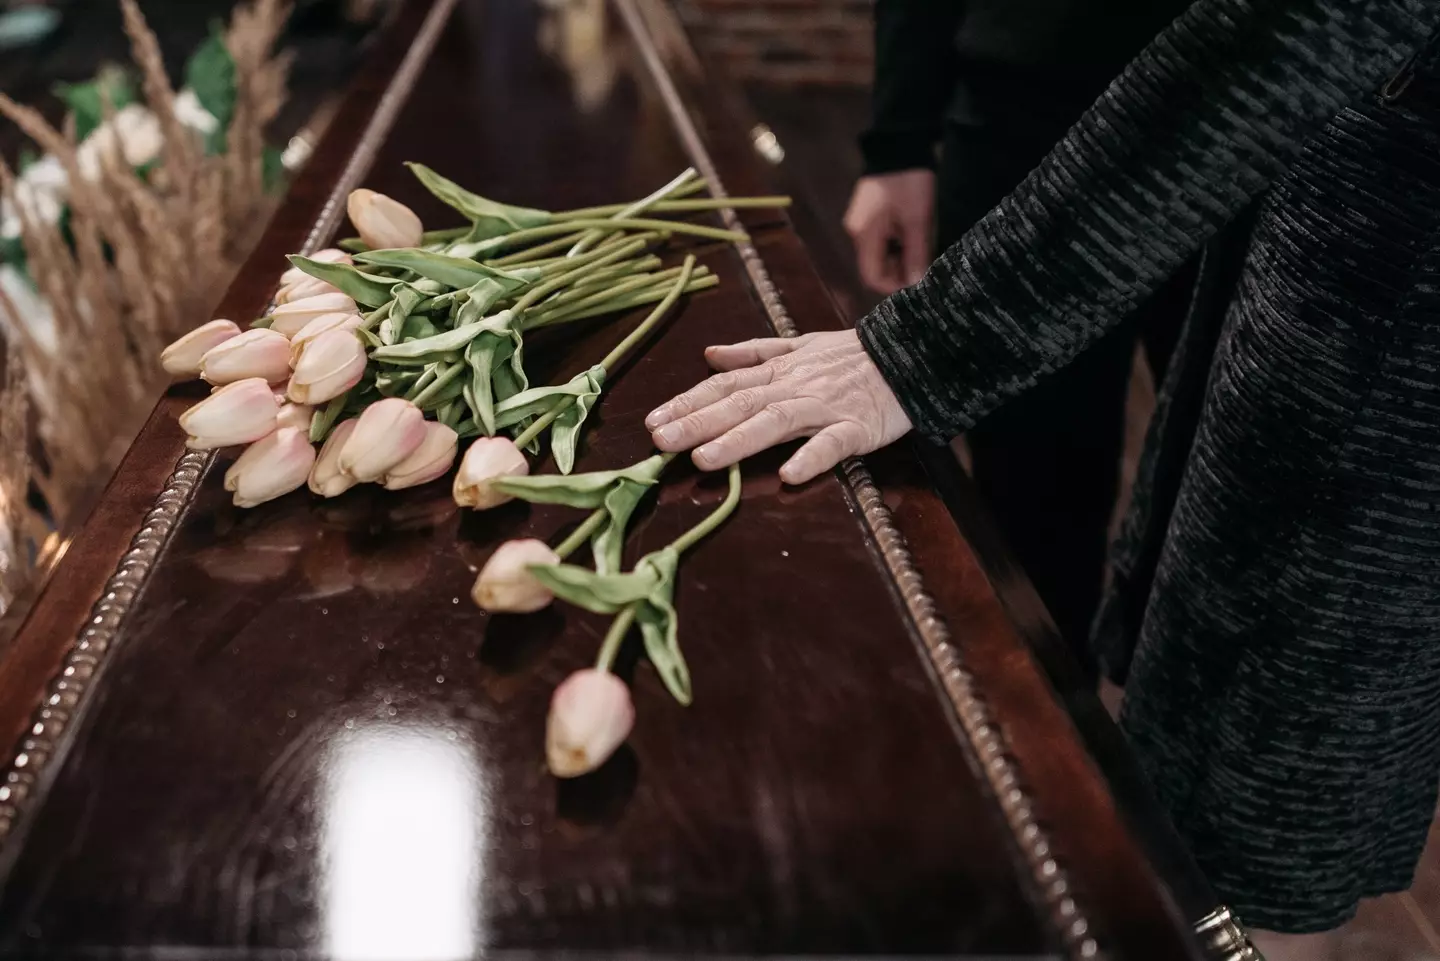 The Redditer says he decided to propose when standing over his girlfriend's mother's casket.